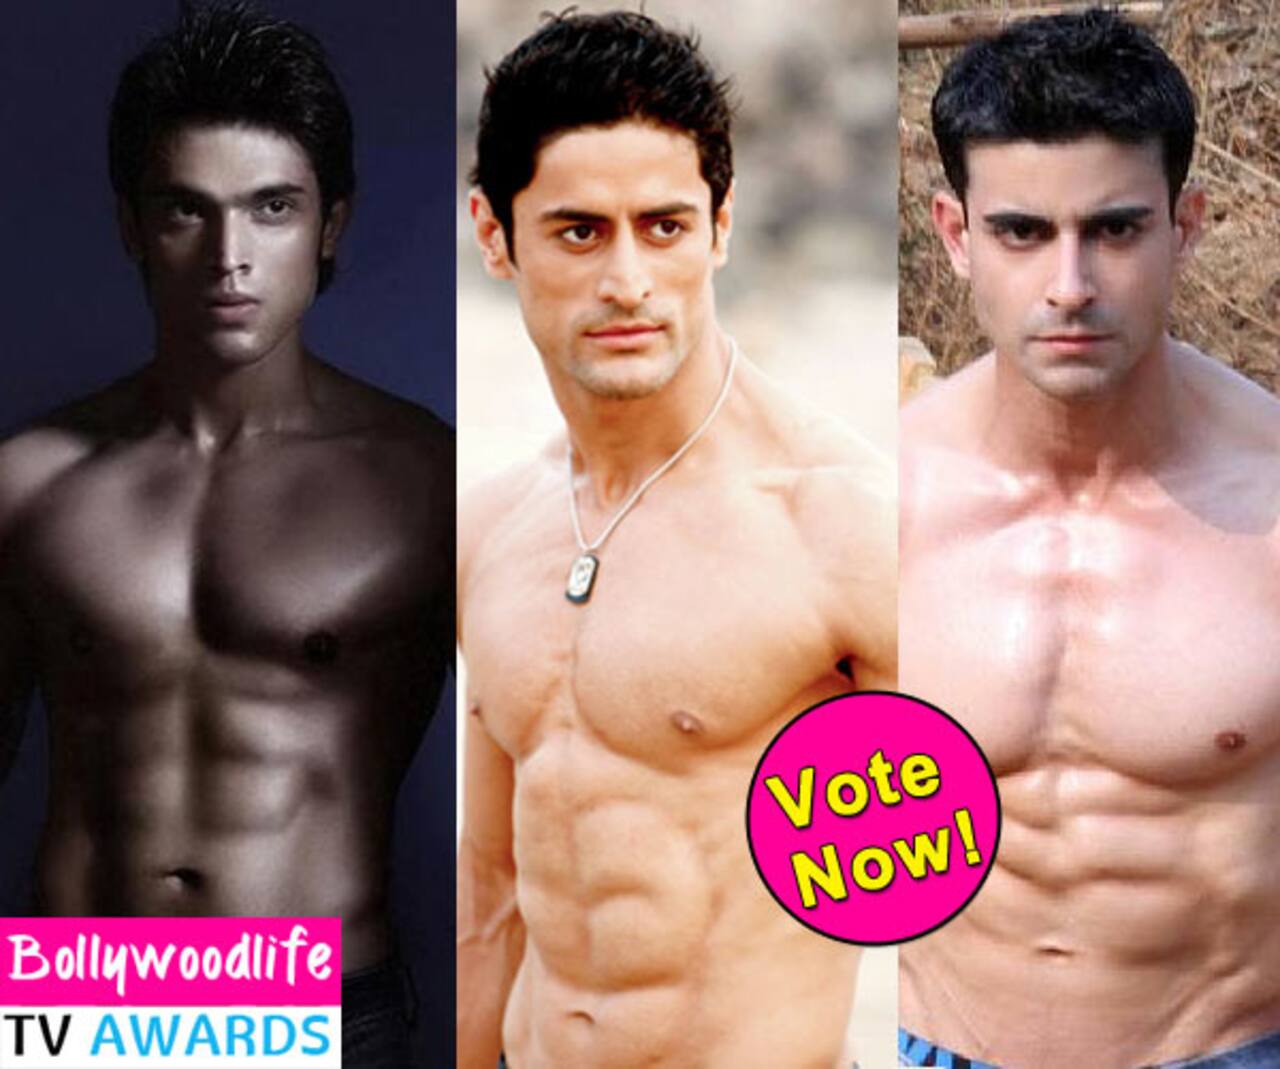 BollywoodLife TV Awards 2015: Gautam Rode, Mohit Raina, Parth Samthaan – who is the hottest TV actor? Vote!